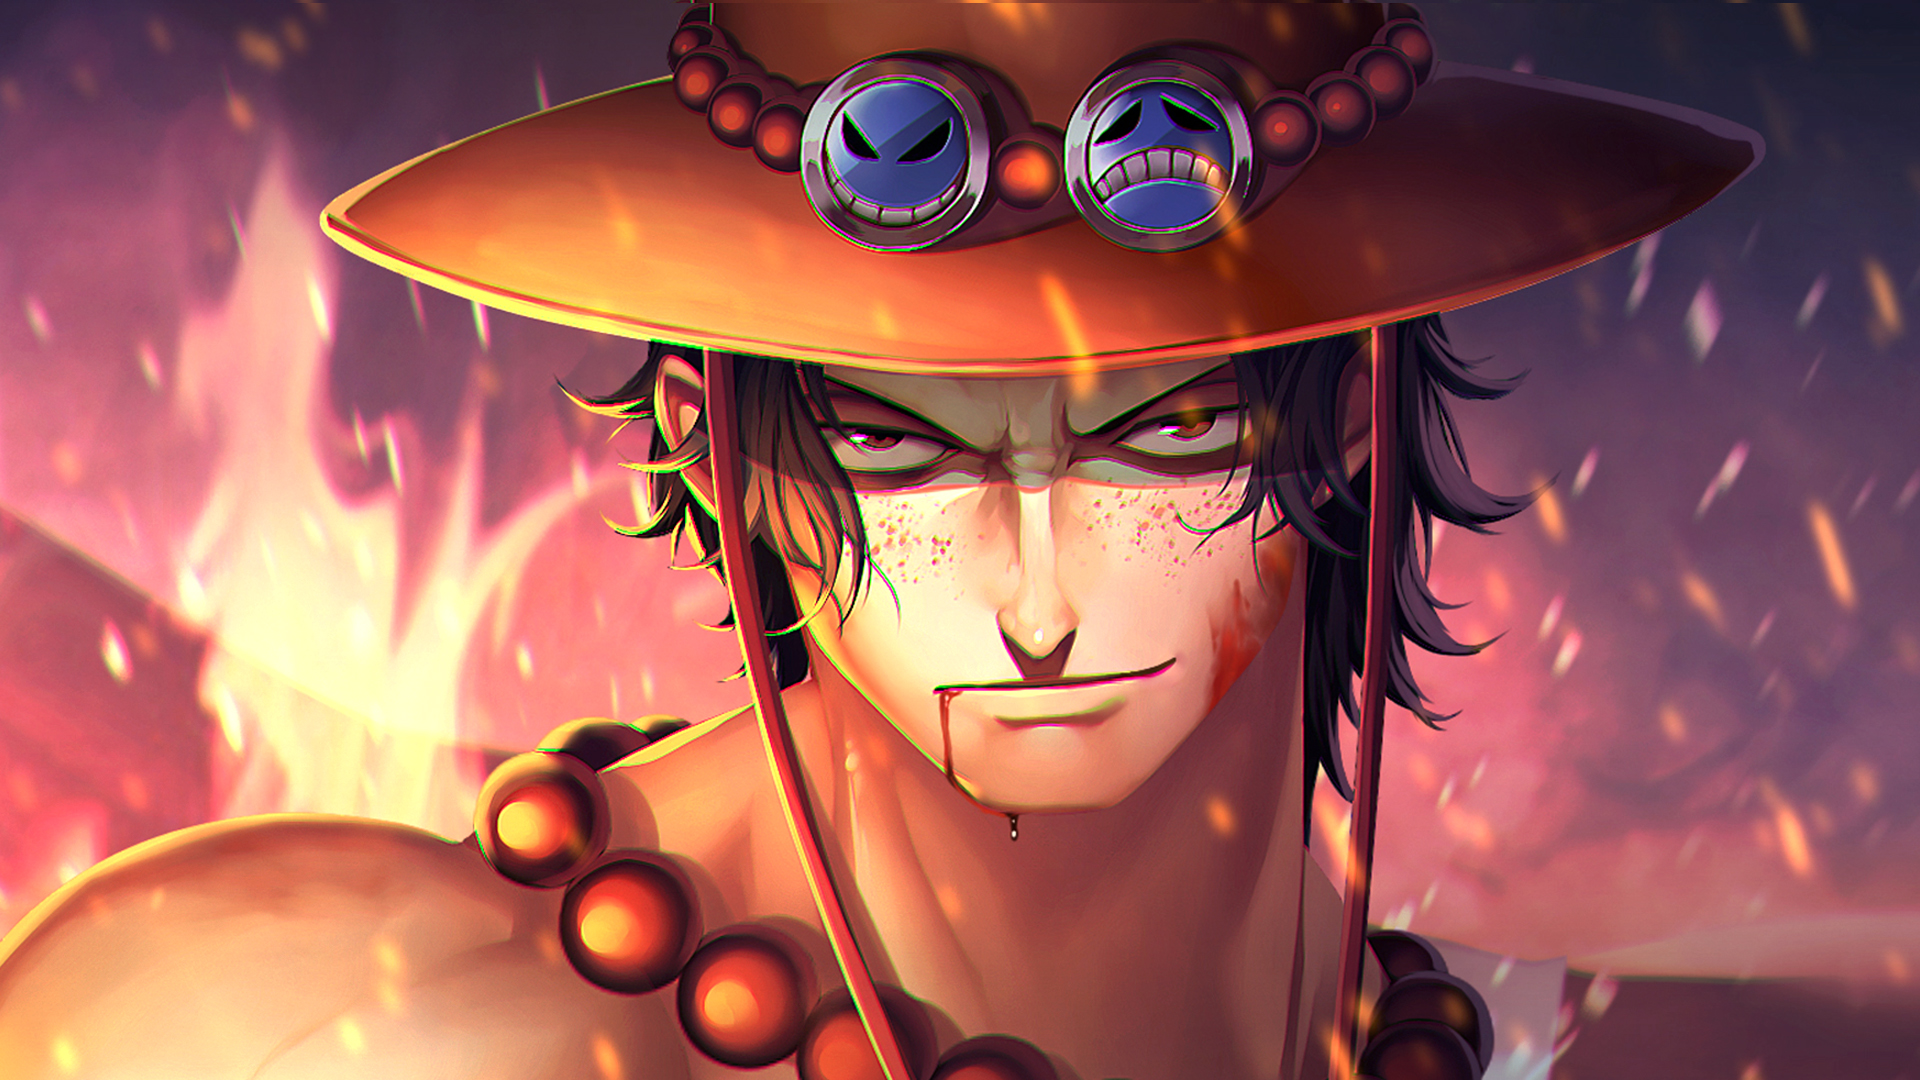 240 Portgas D Ace HD Wallpapers and Backgrounds 1920x1080